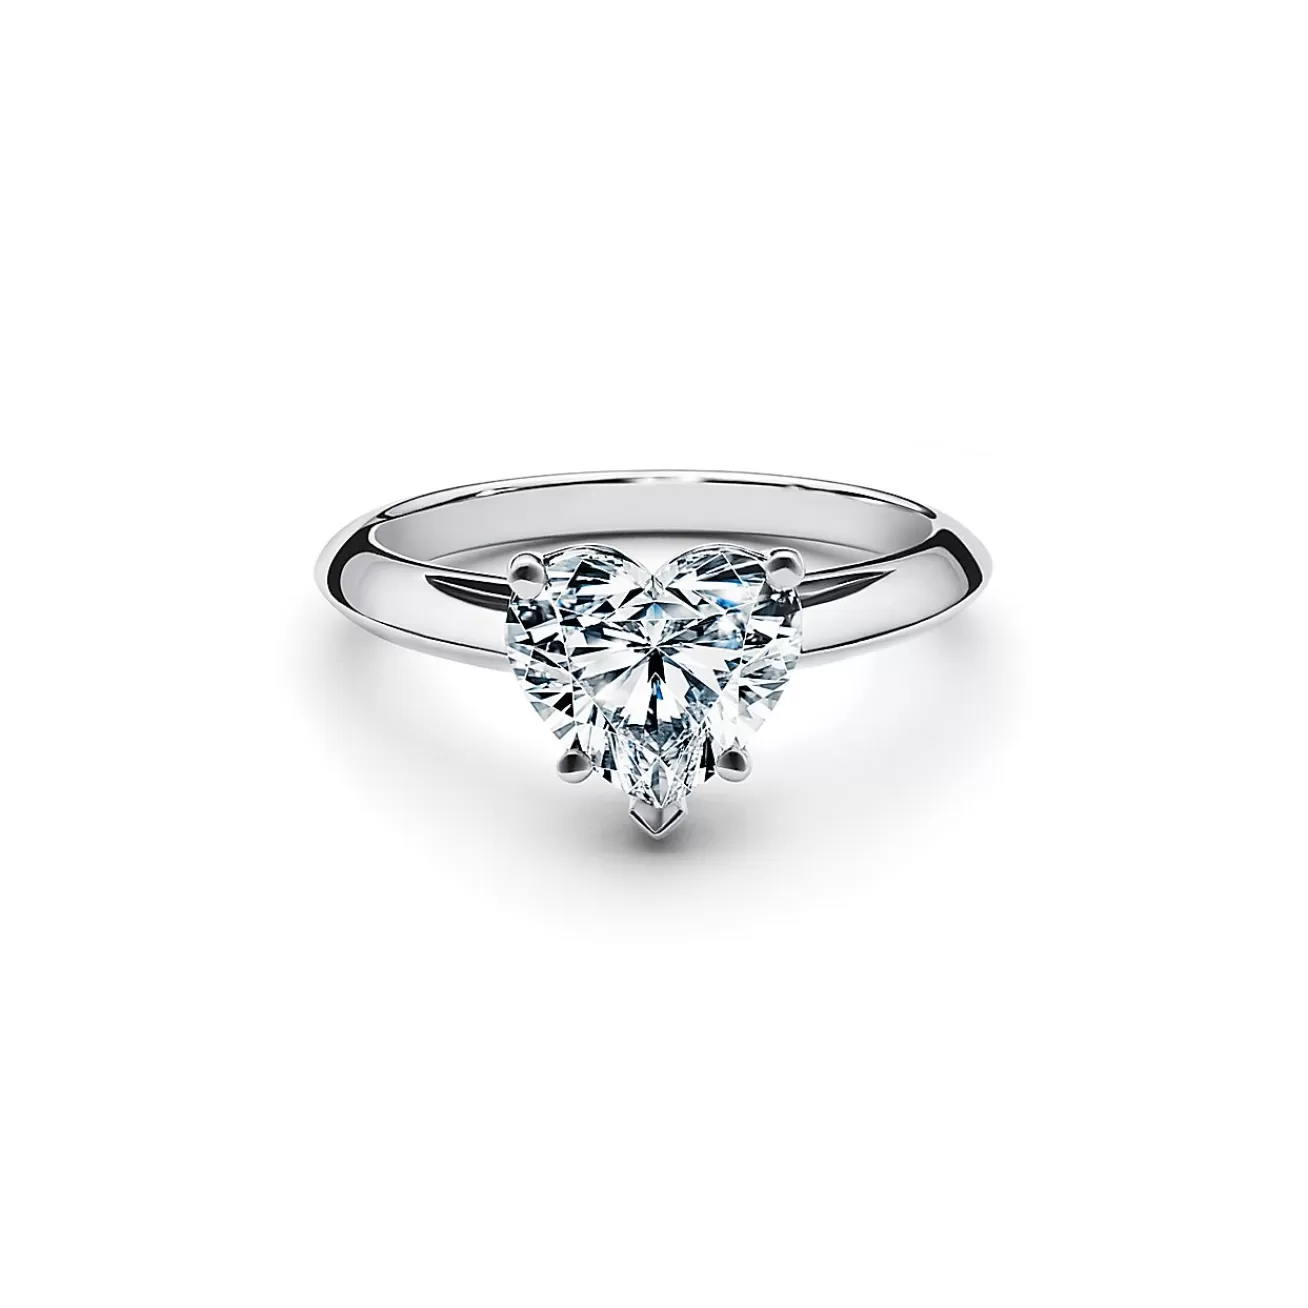 Tiffany & Co. Heart-shaped diamond engagement ring in platinum. | ^ Engagement Rings